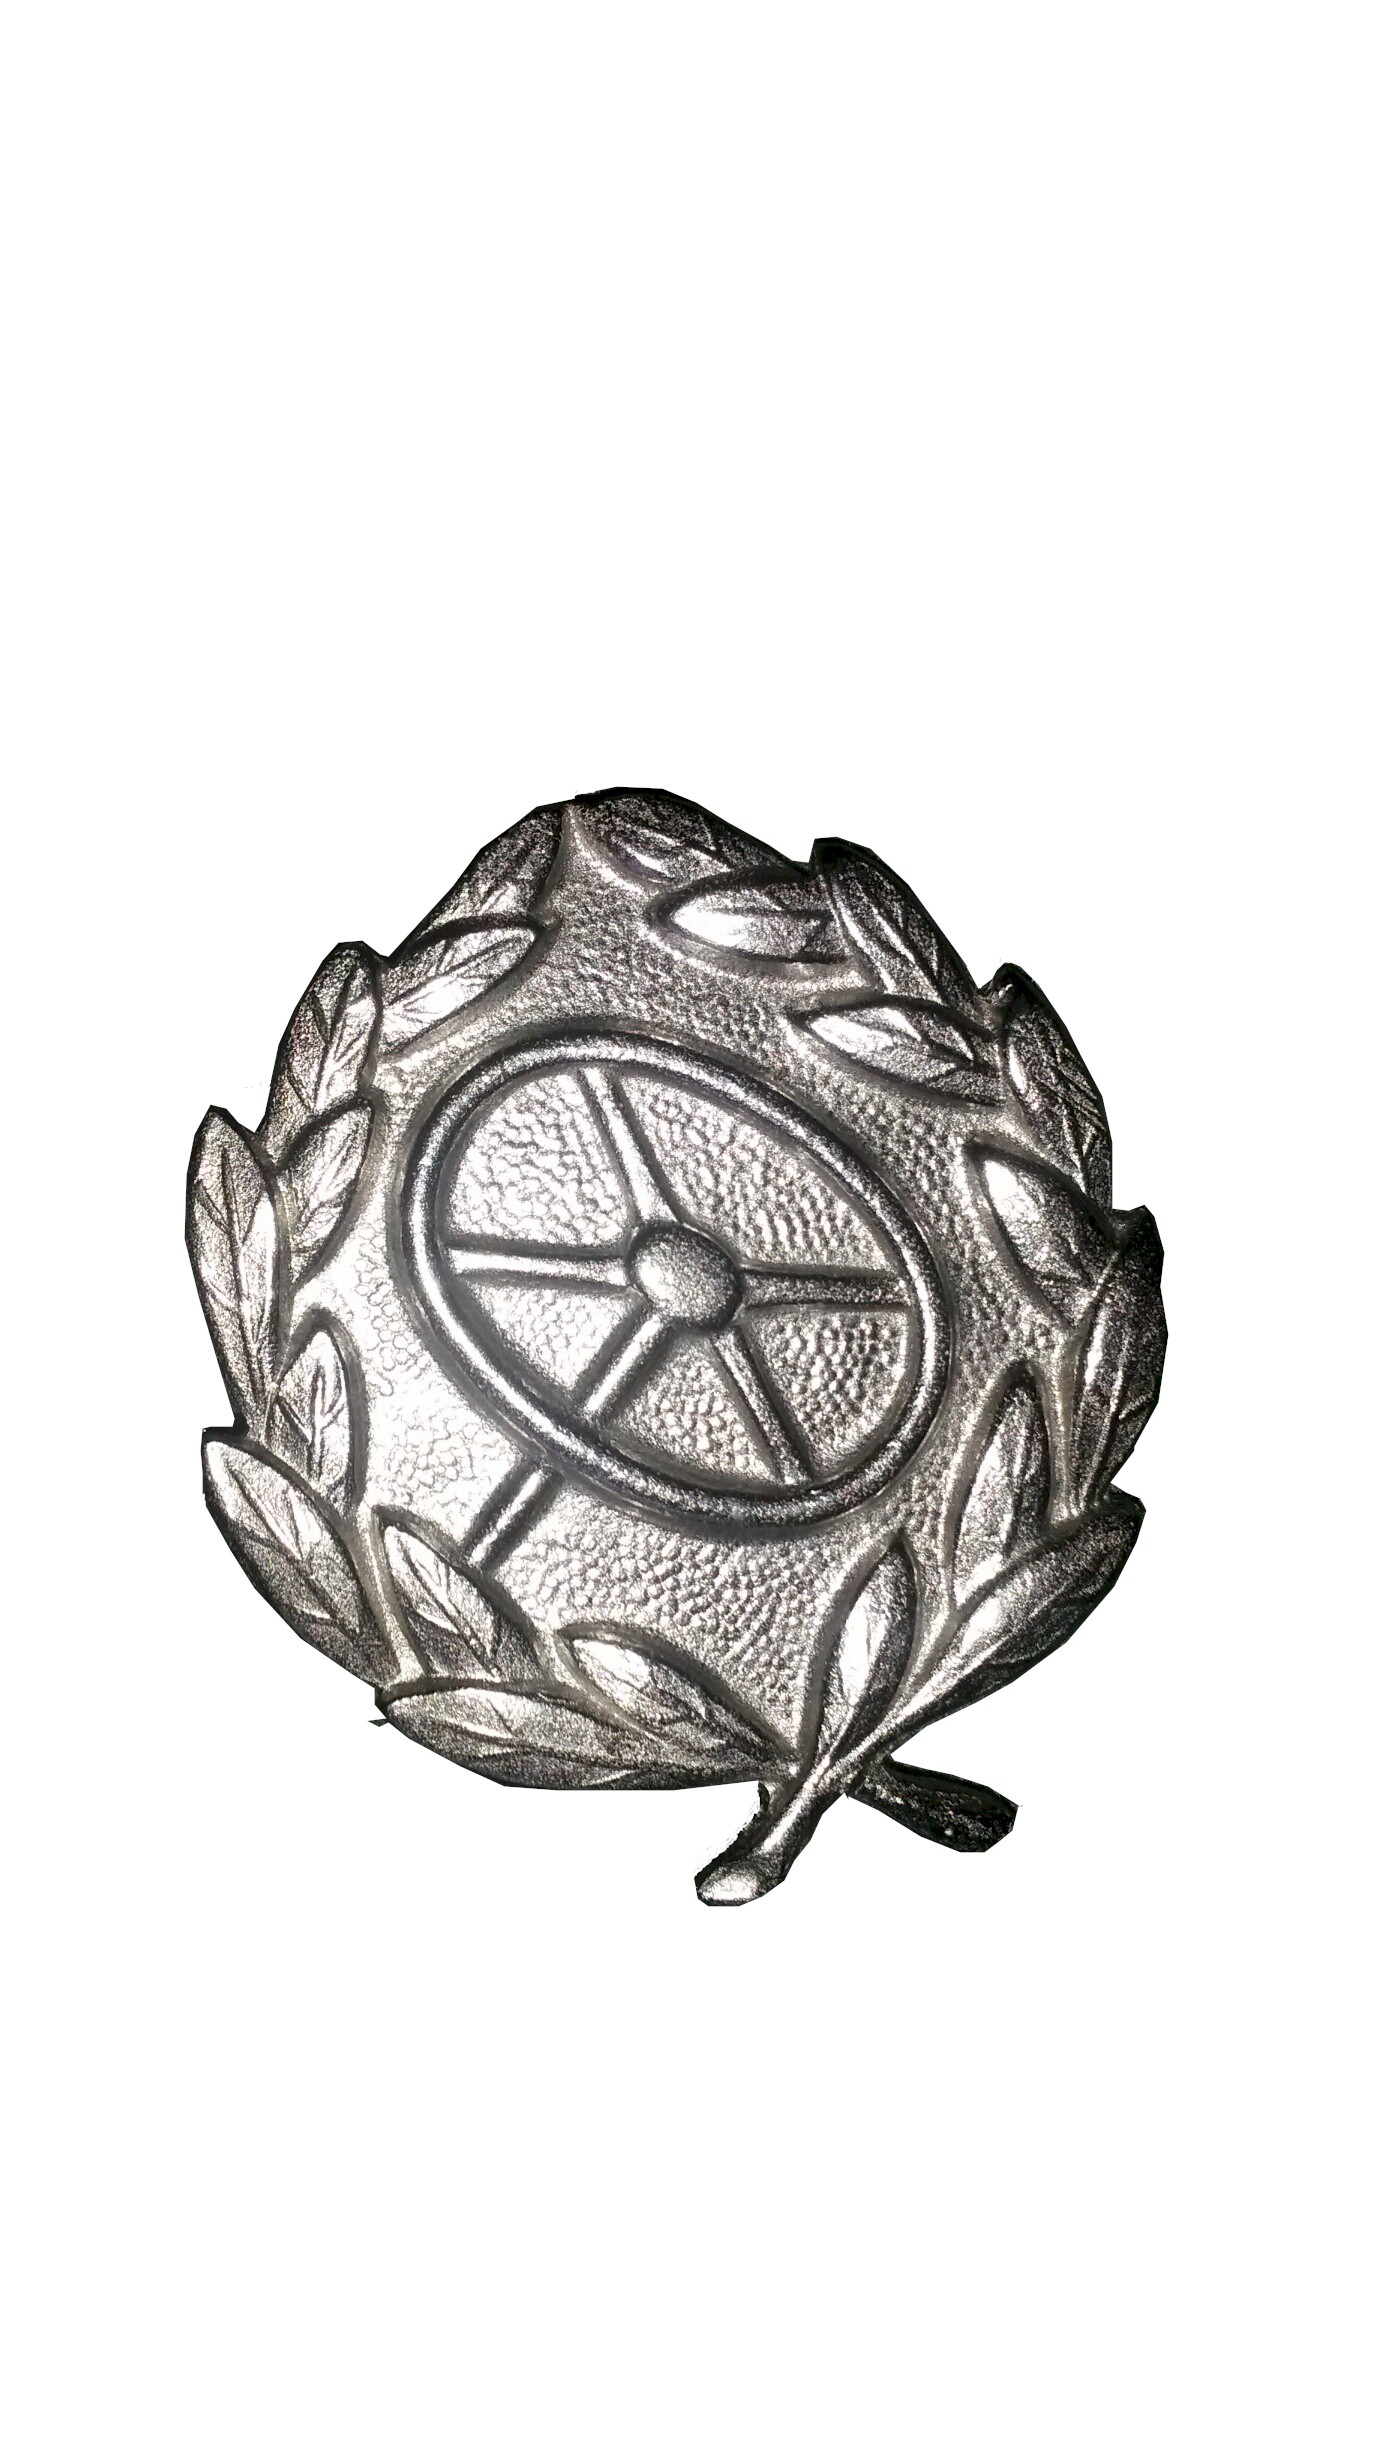 ww2 GERMAN DRIVER'S QUALIFICATION BADGE SILVER